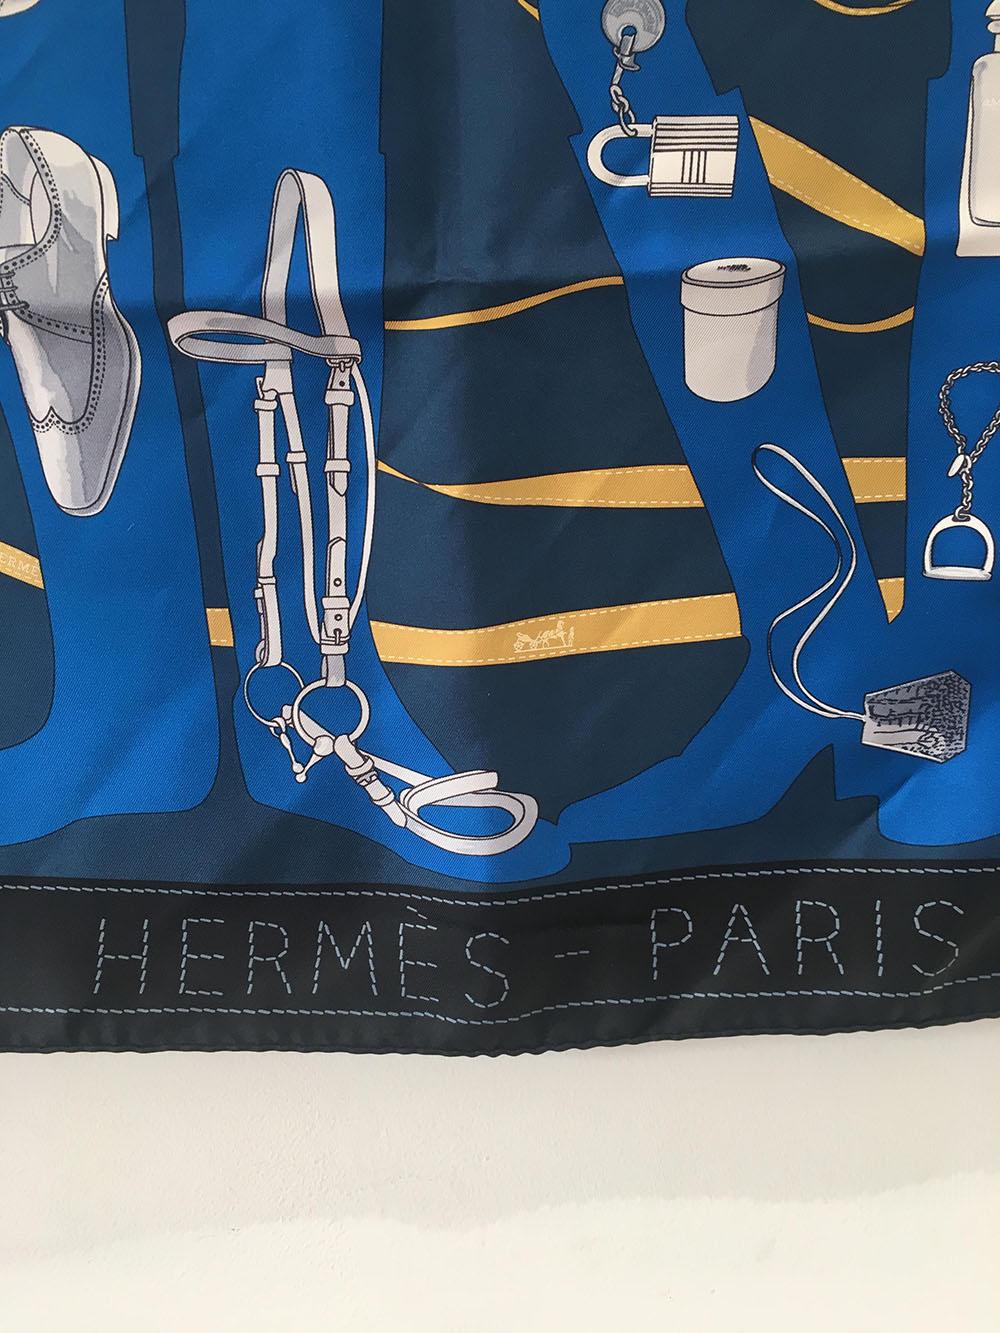 Beautiful Hermes Monsieur et Madame Silk scarf in Navy in excellent condition. Original silk screen design c2006 by Bali Barret features a centered blue outline of a man and woman standing together filled with the various Hermes accessories that